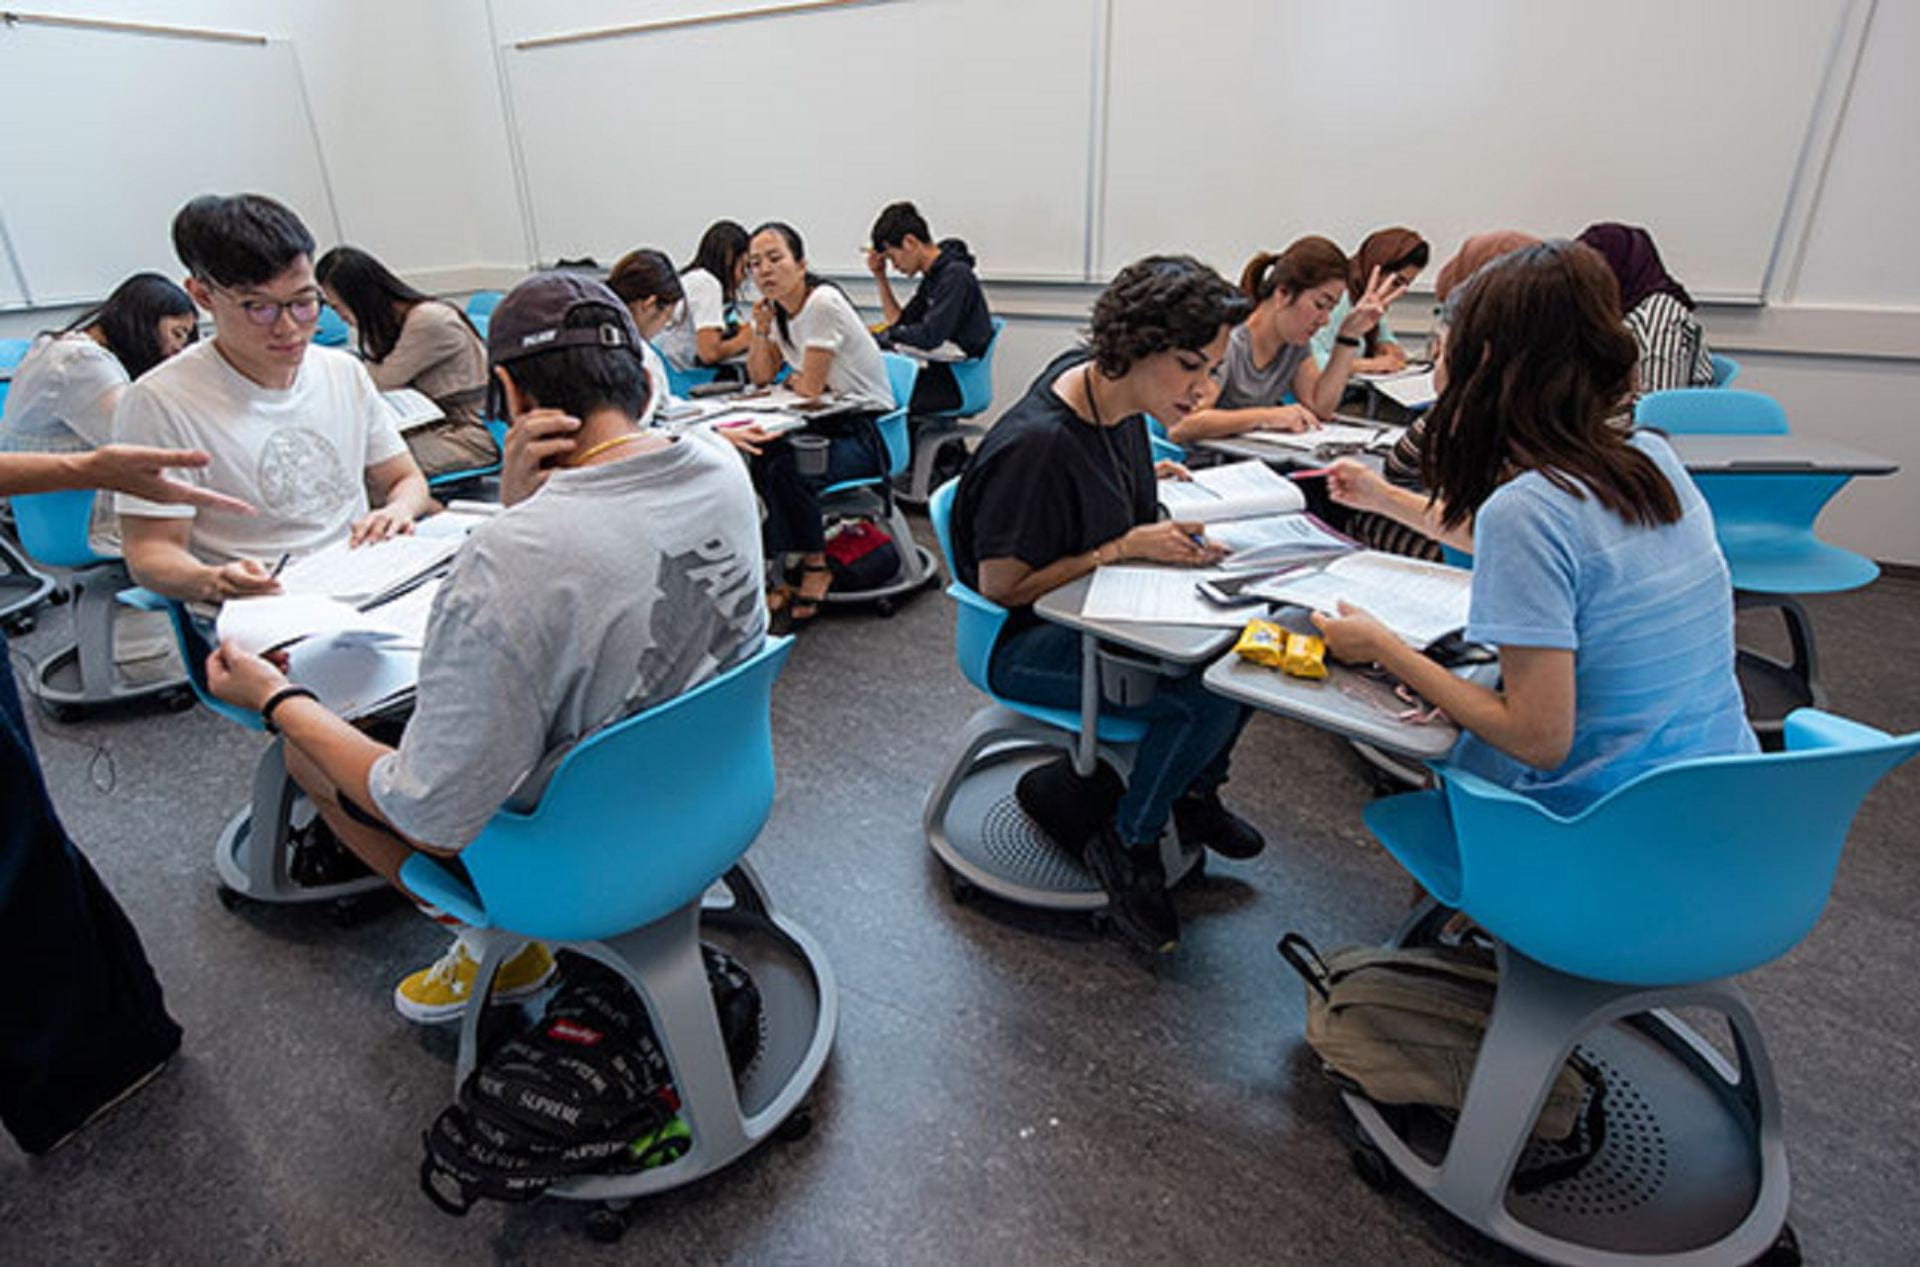 students working in a classroom